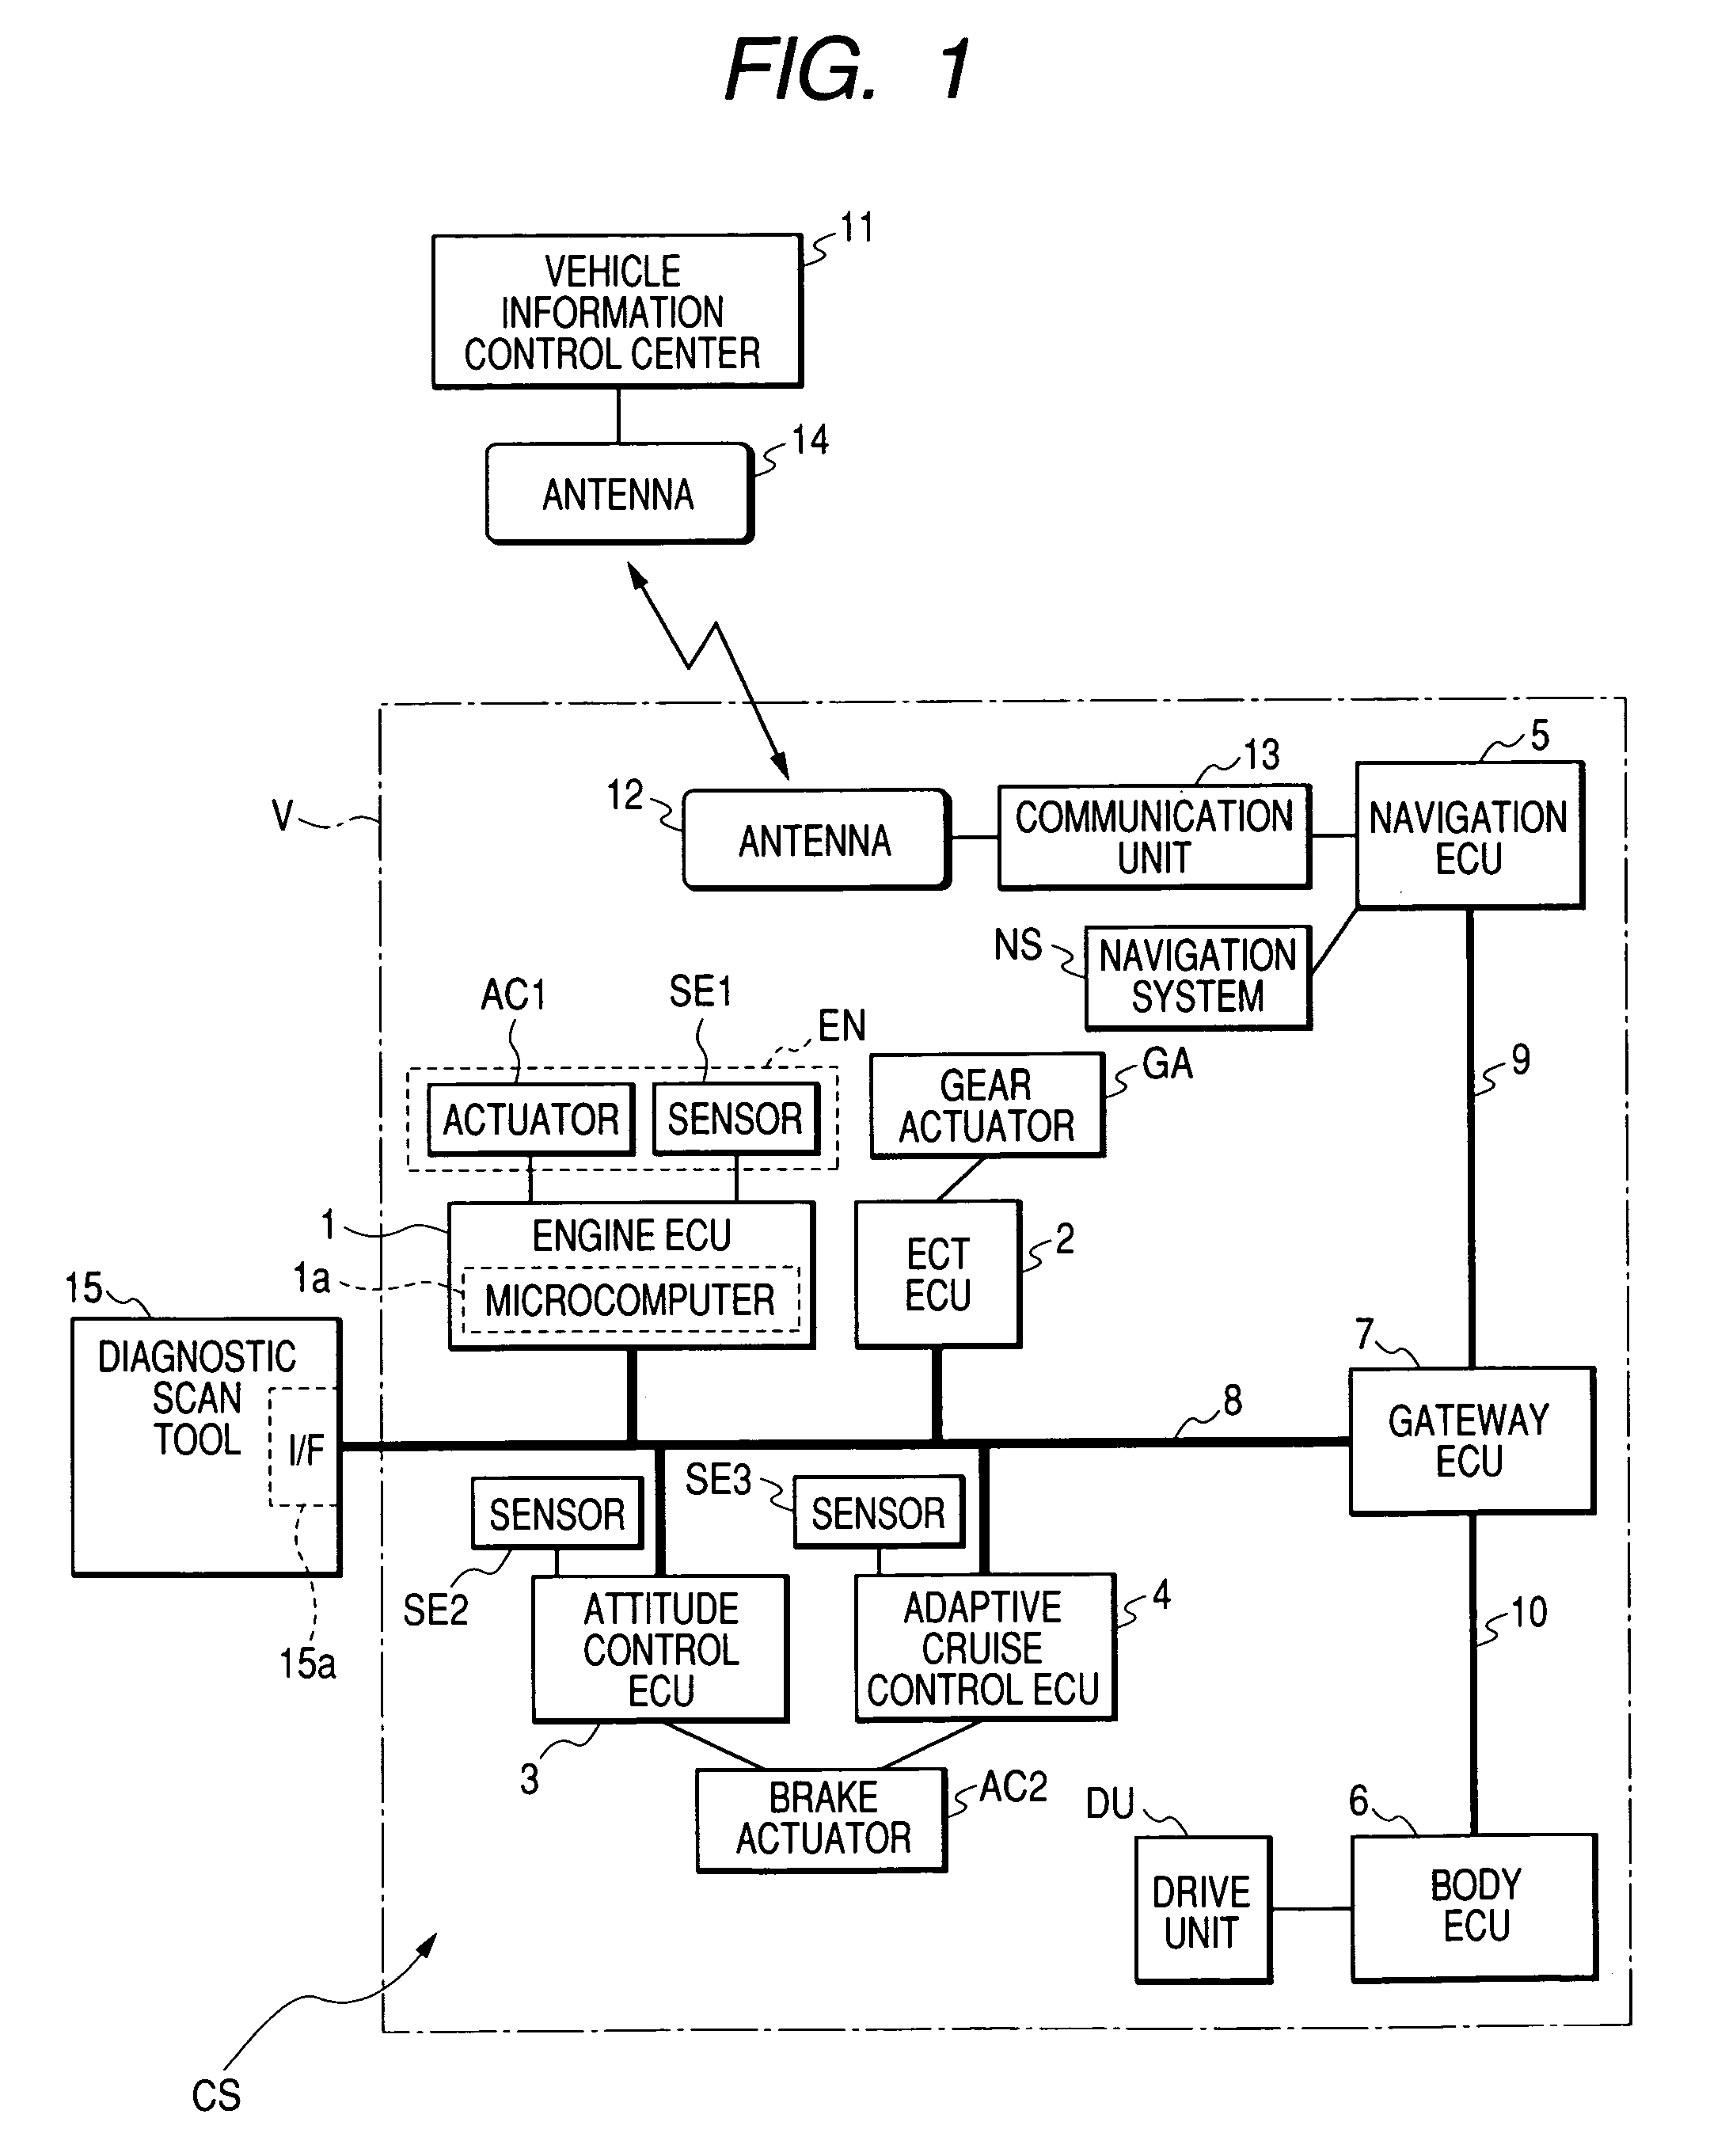 In-vehicle control apparatus communicably coupled through a communication line